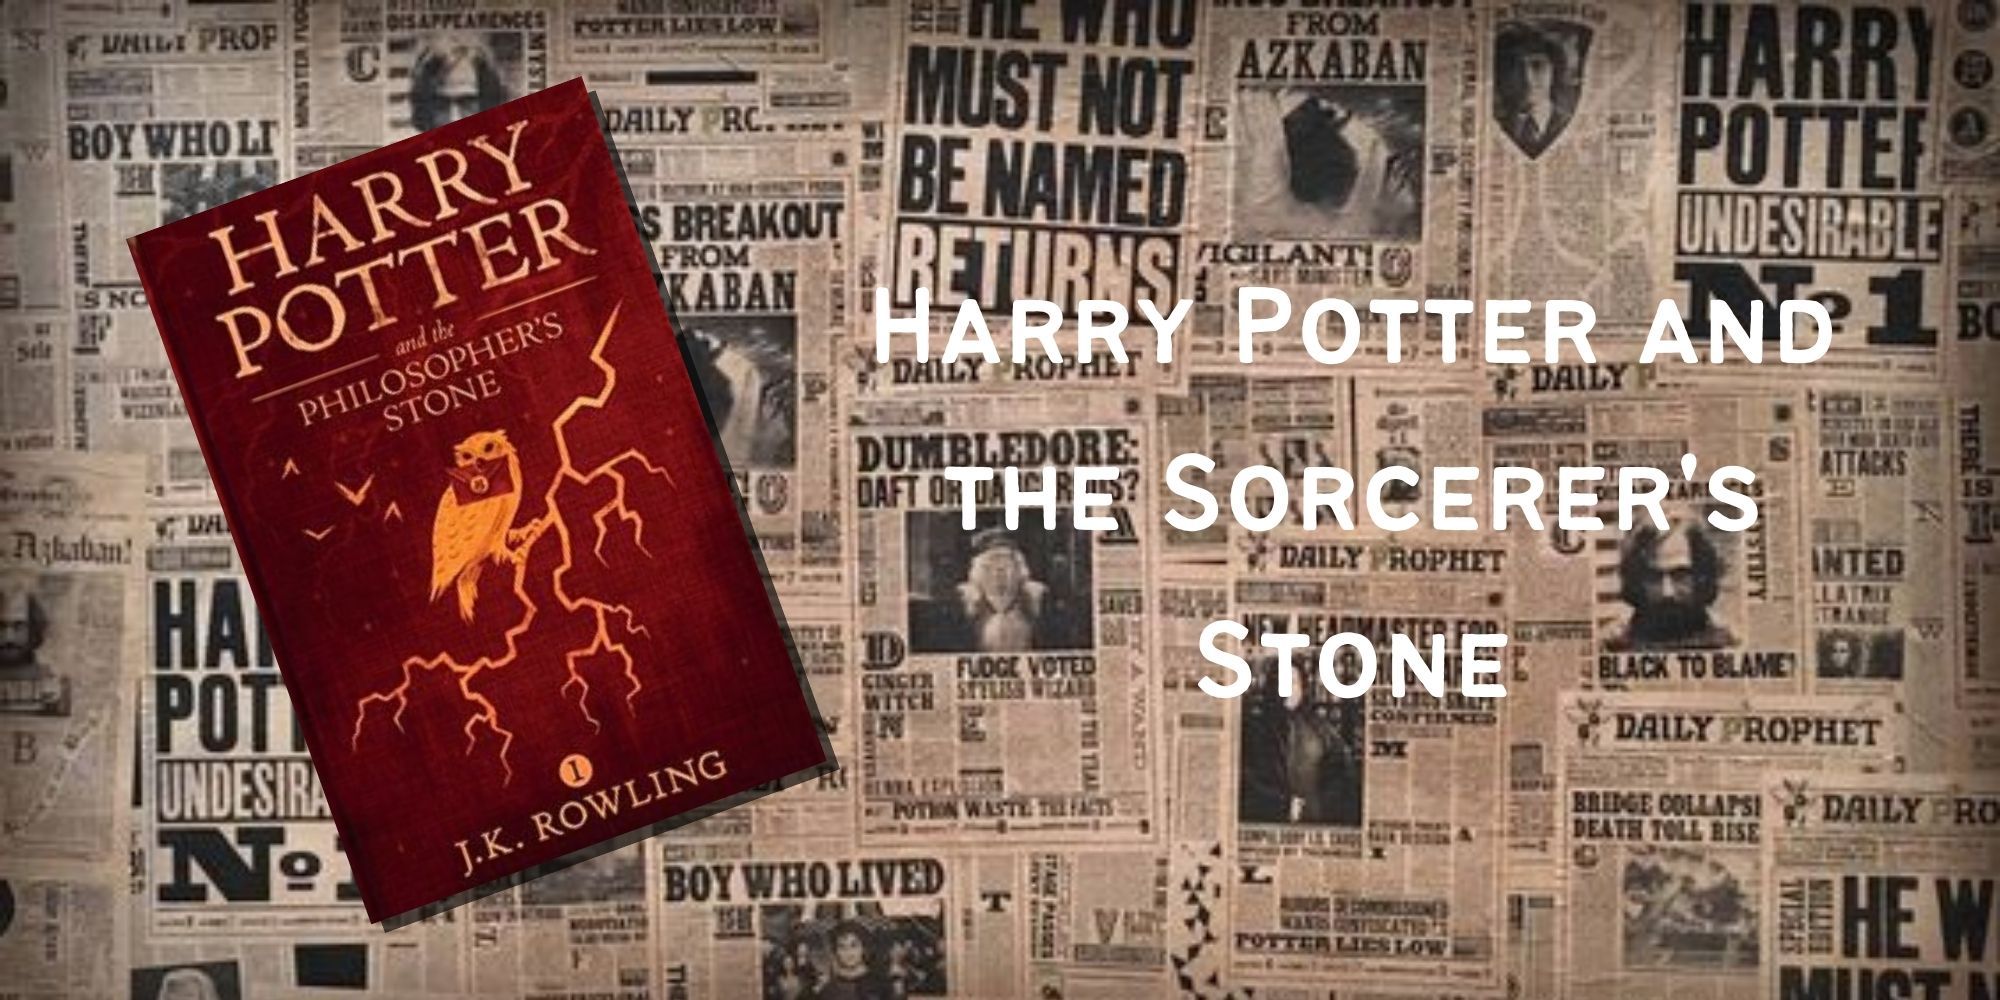 The cover of Harry Potter and the Sorcerer's Stone